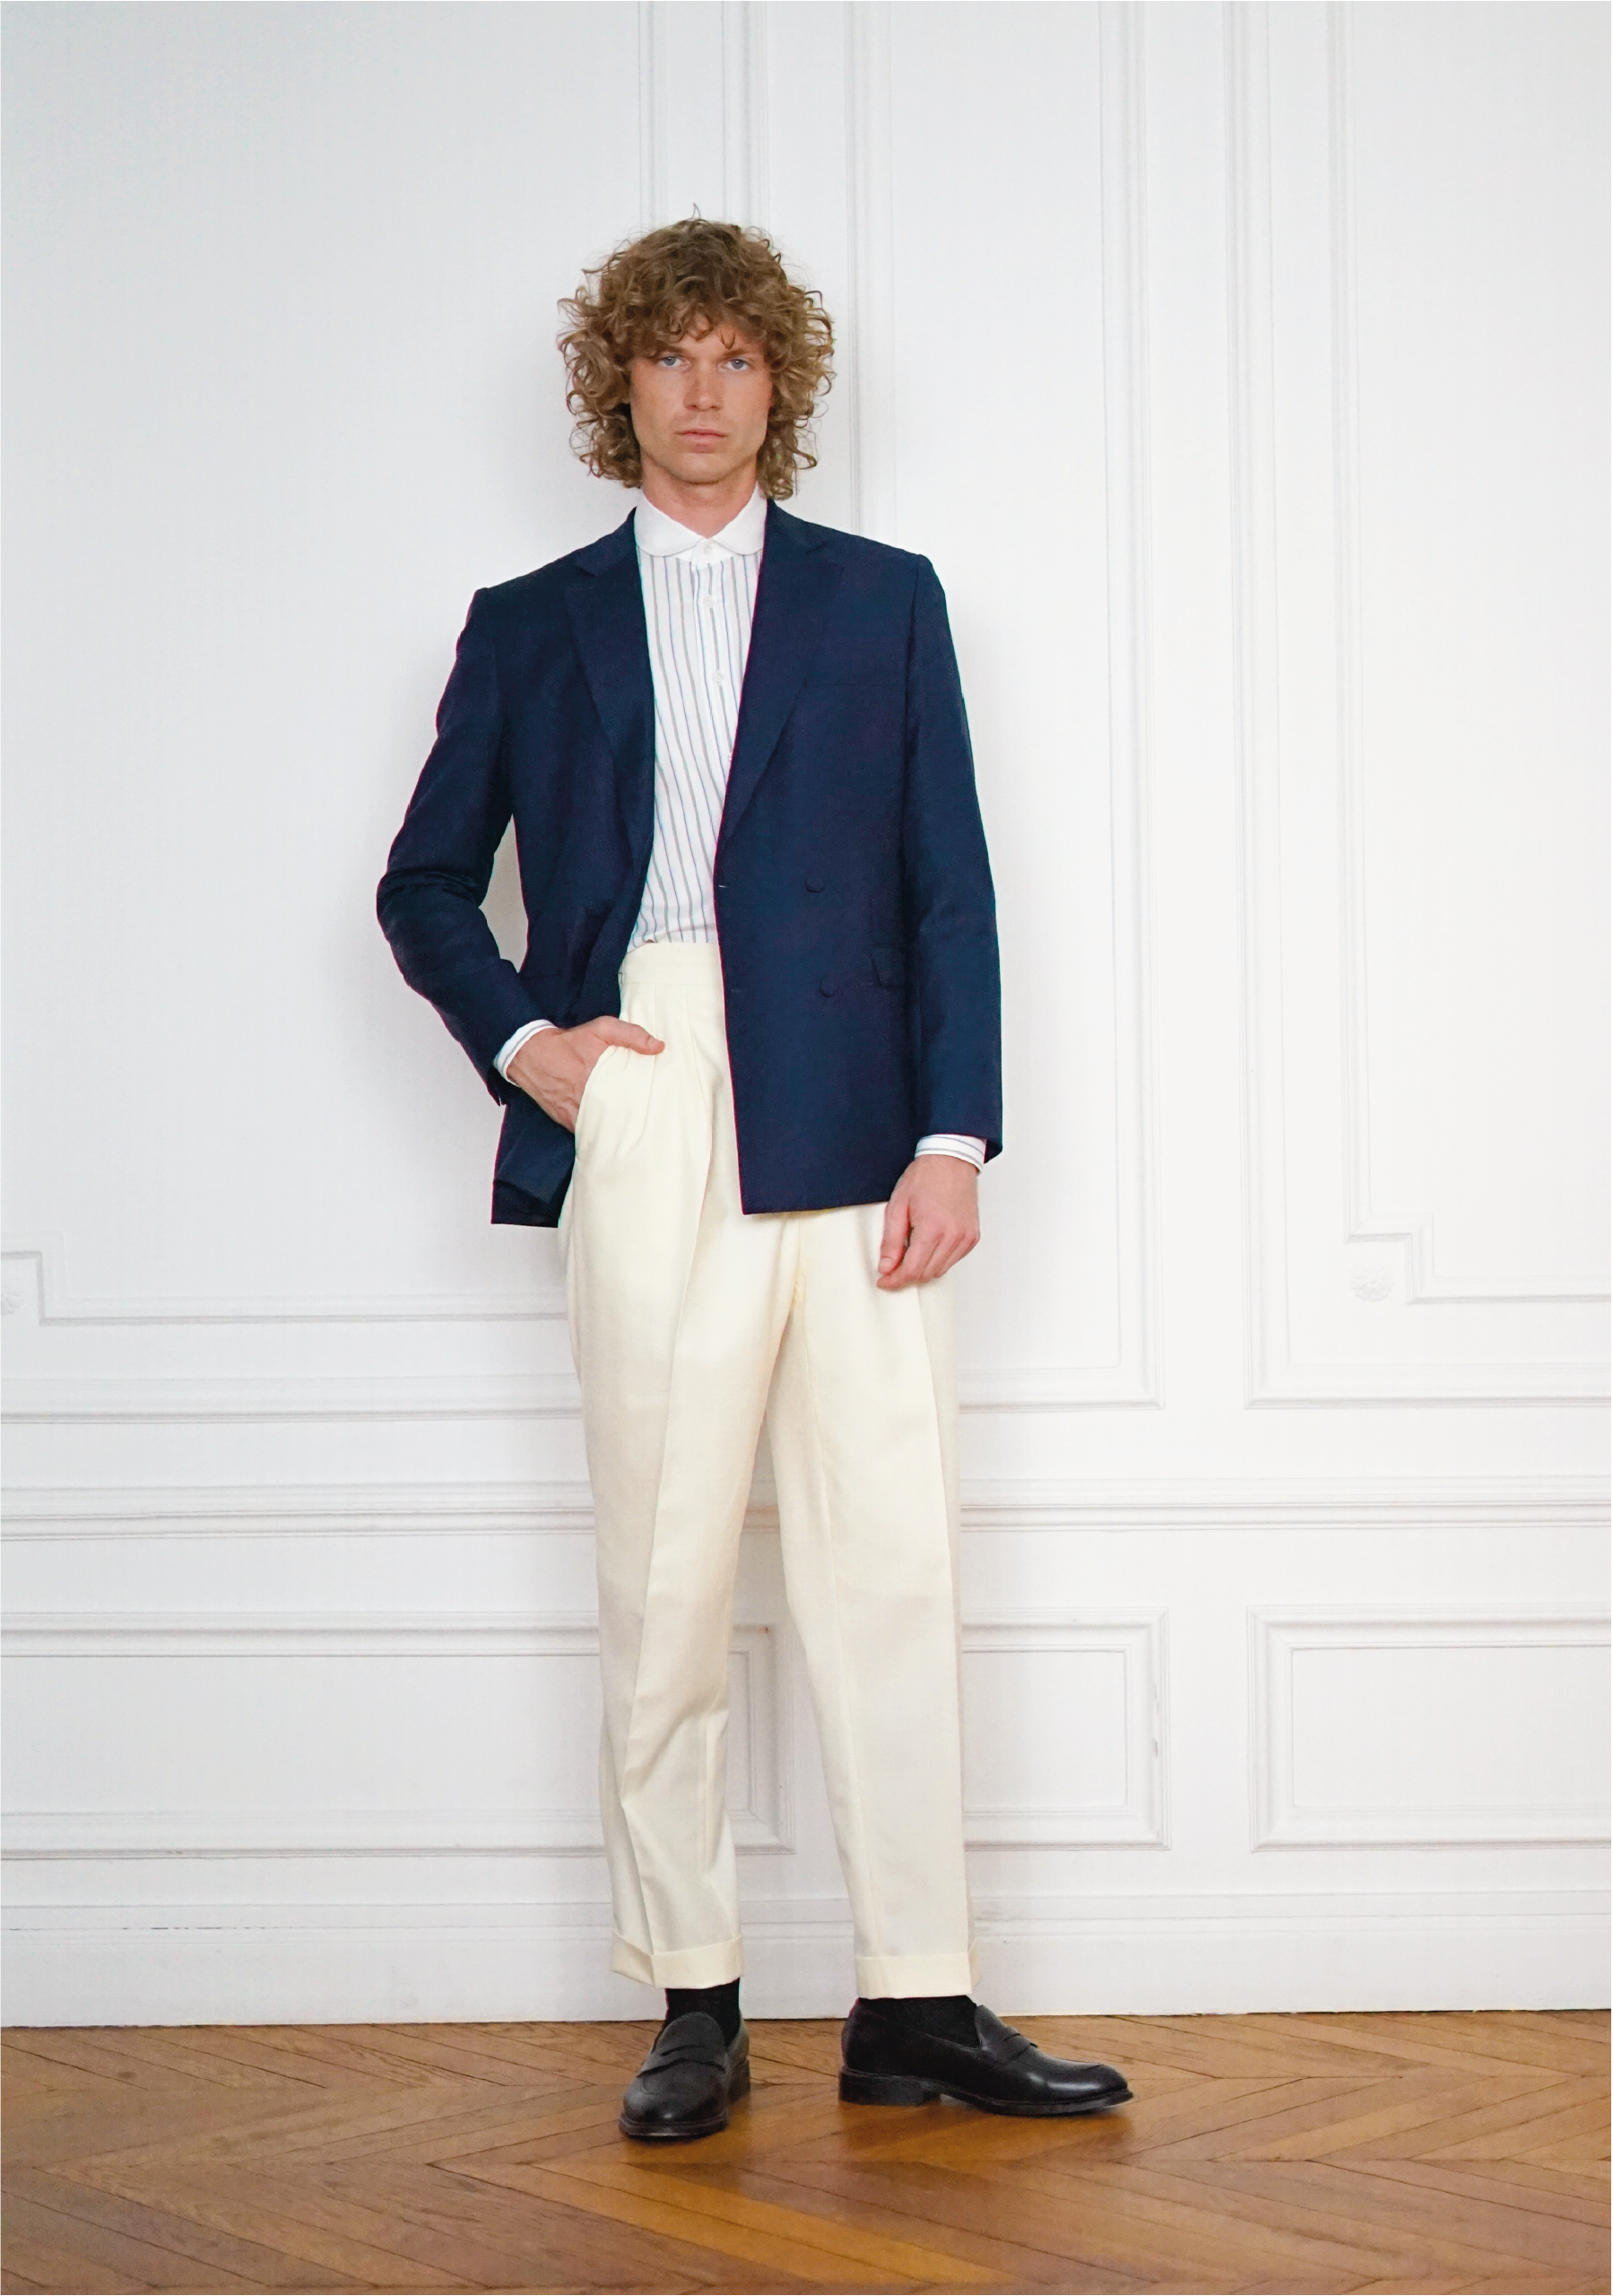 Tailor-made Wedding Outfit Double-breasted jacket Navy blue | Rives Paris ©.